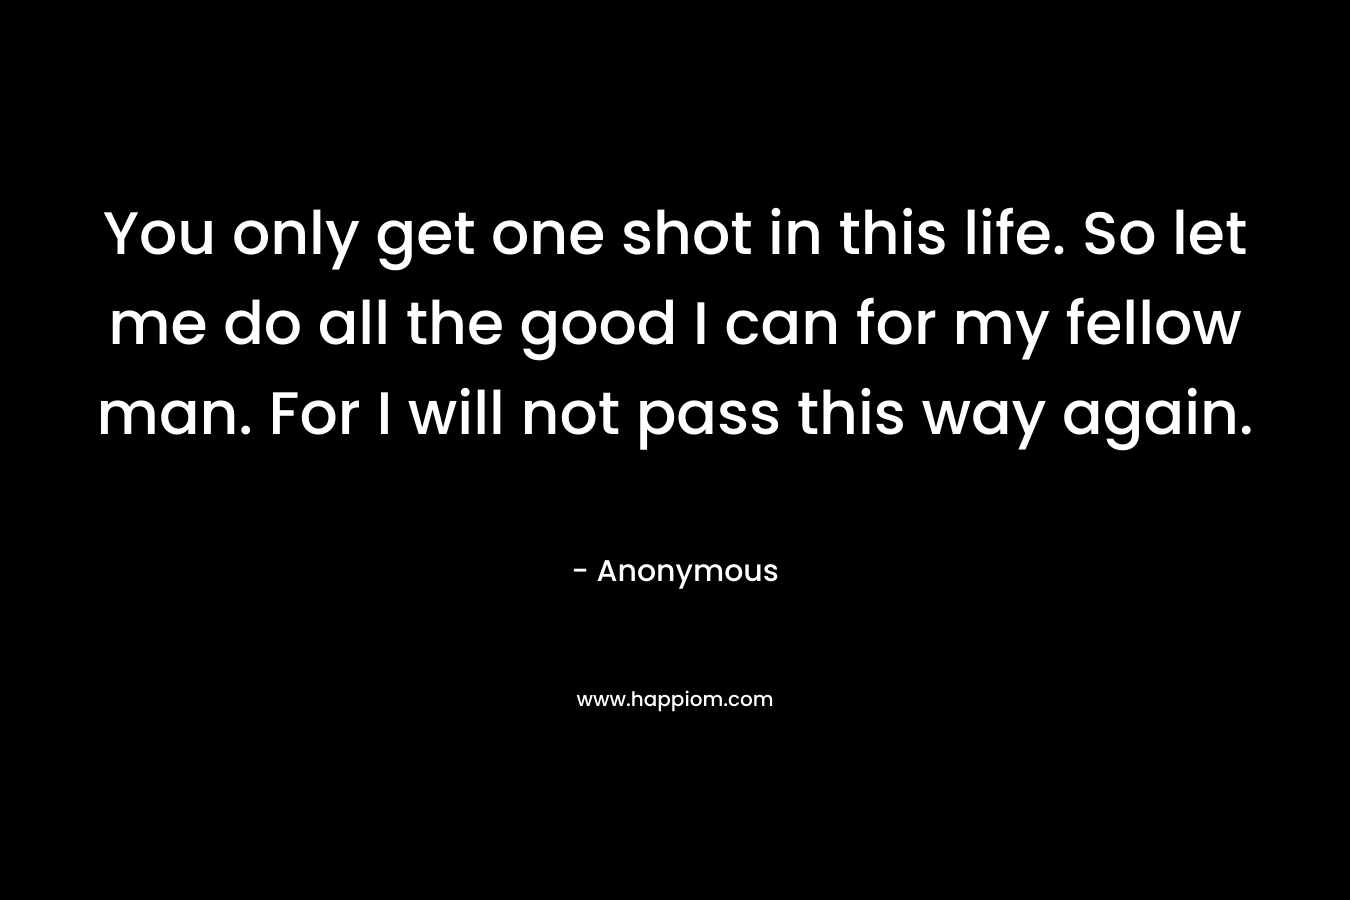 You only get one shot in this life. So let me do all the good I can for my fellow man. For I will not pass this way again.